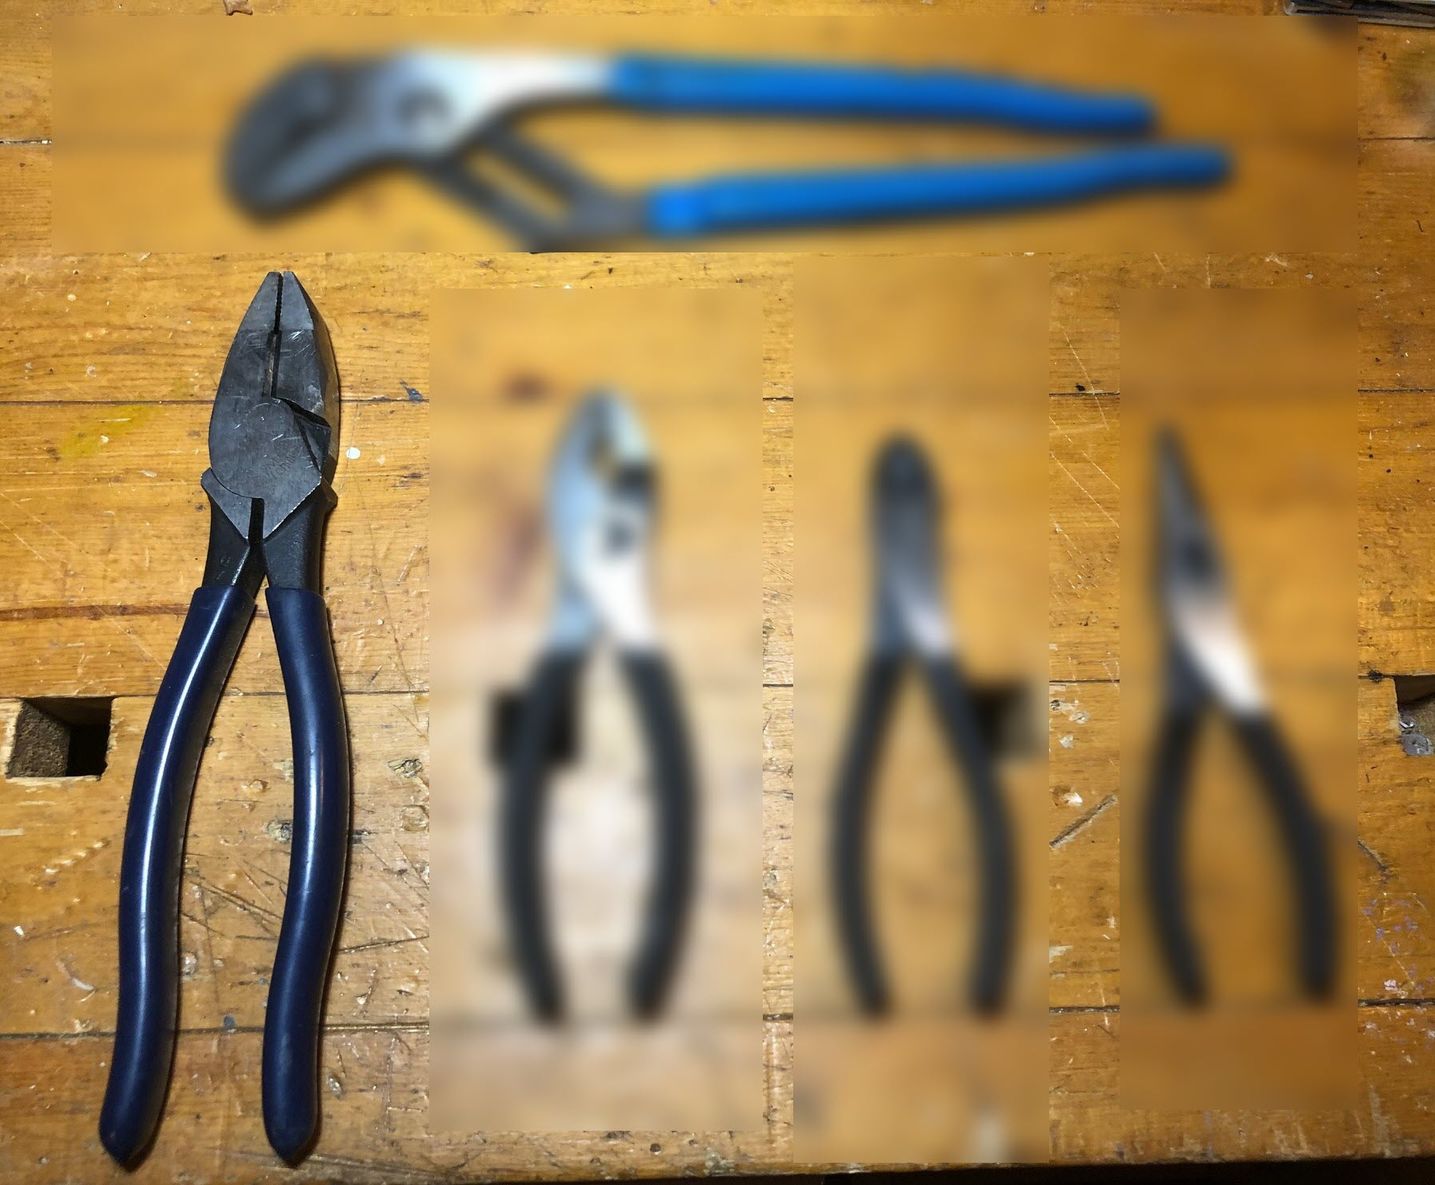 Klein Tools linesman pliers on the left